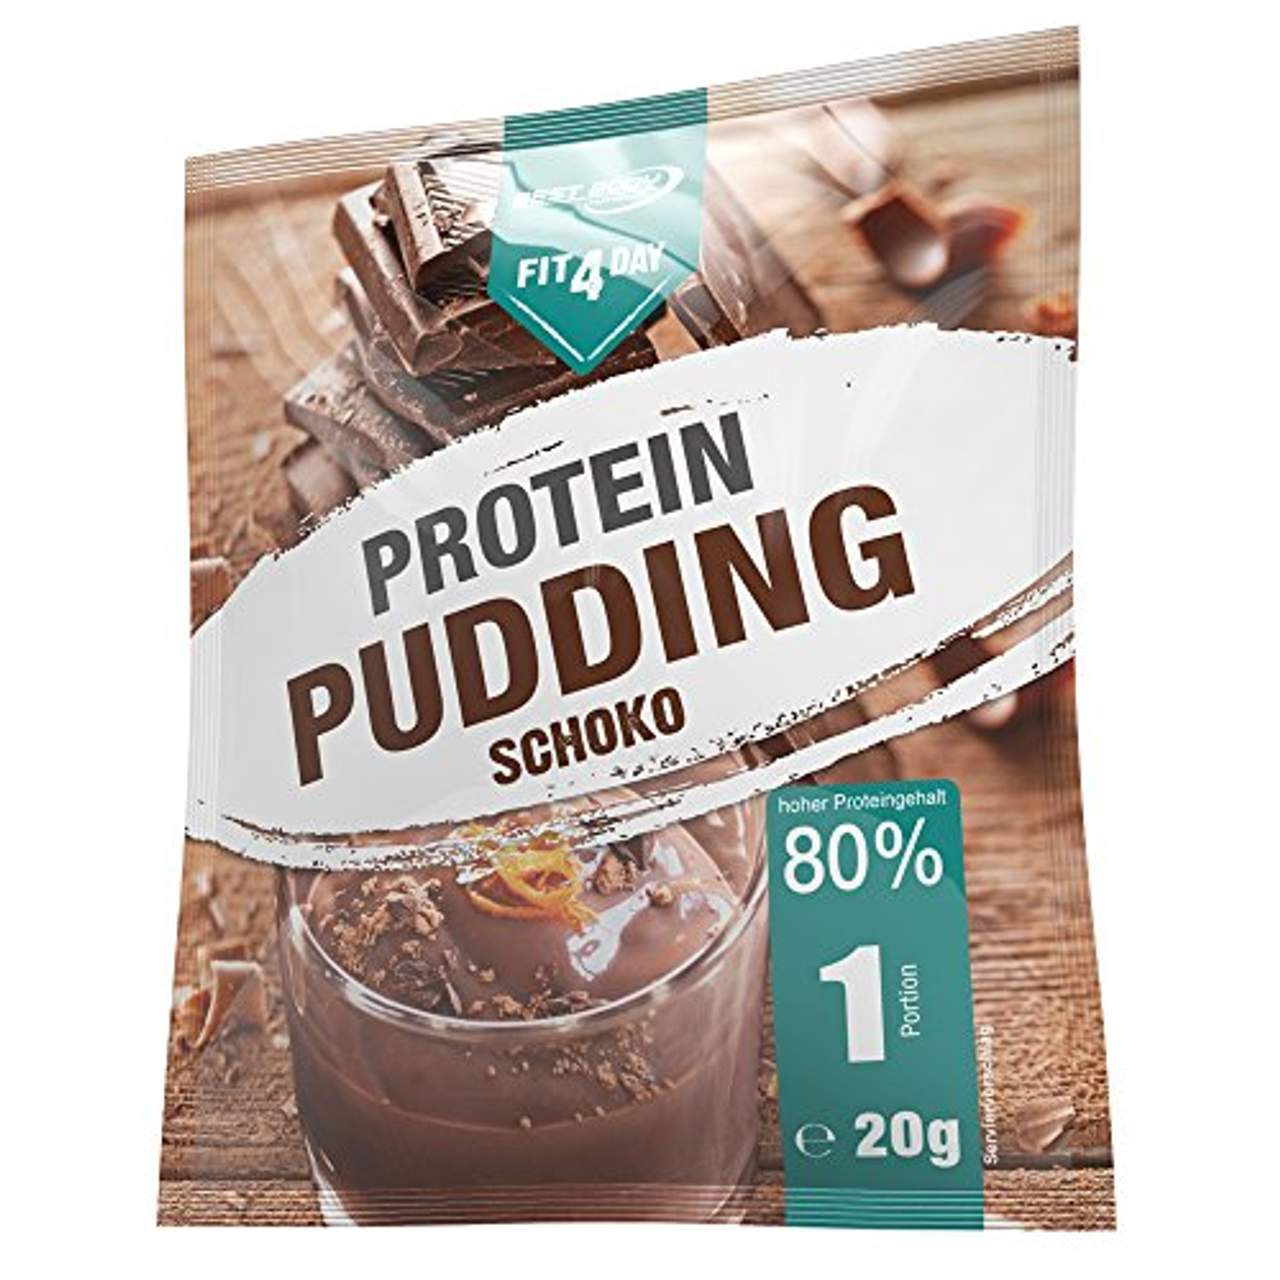 Best Body Nutrition Fit4Day Protein Pudding Schoko